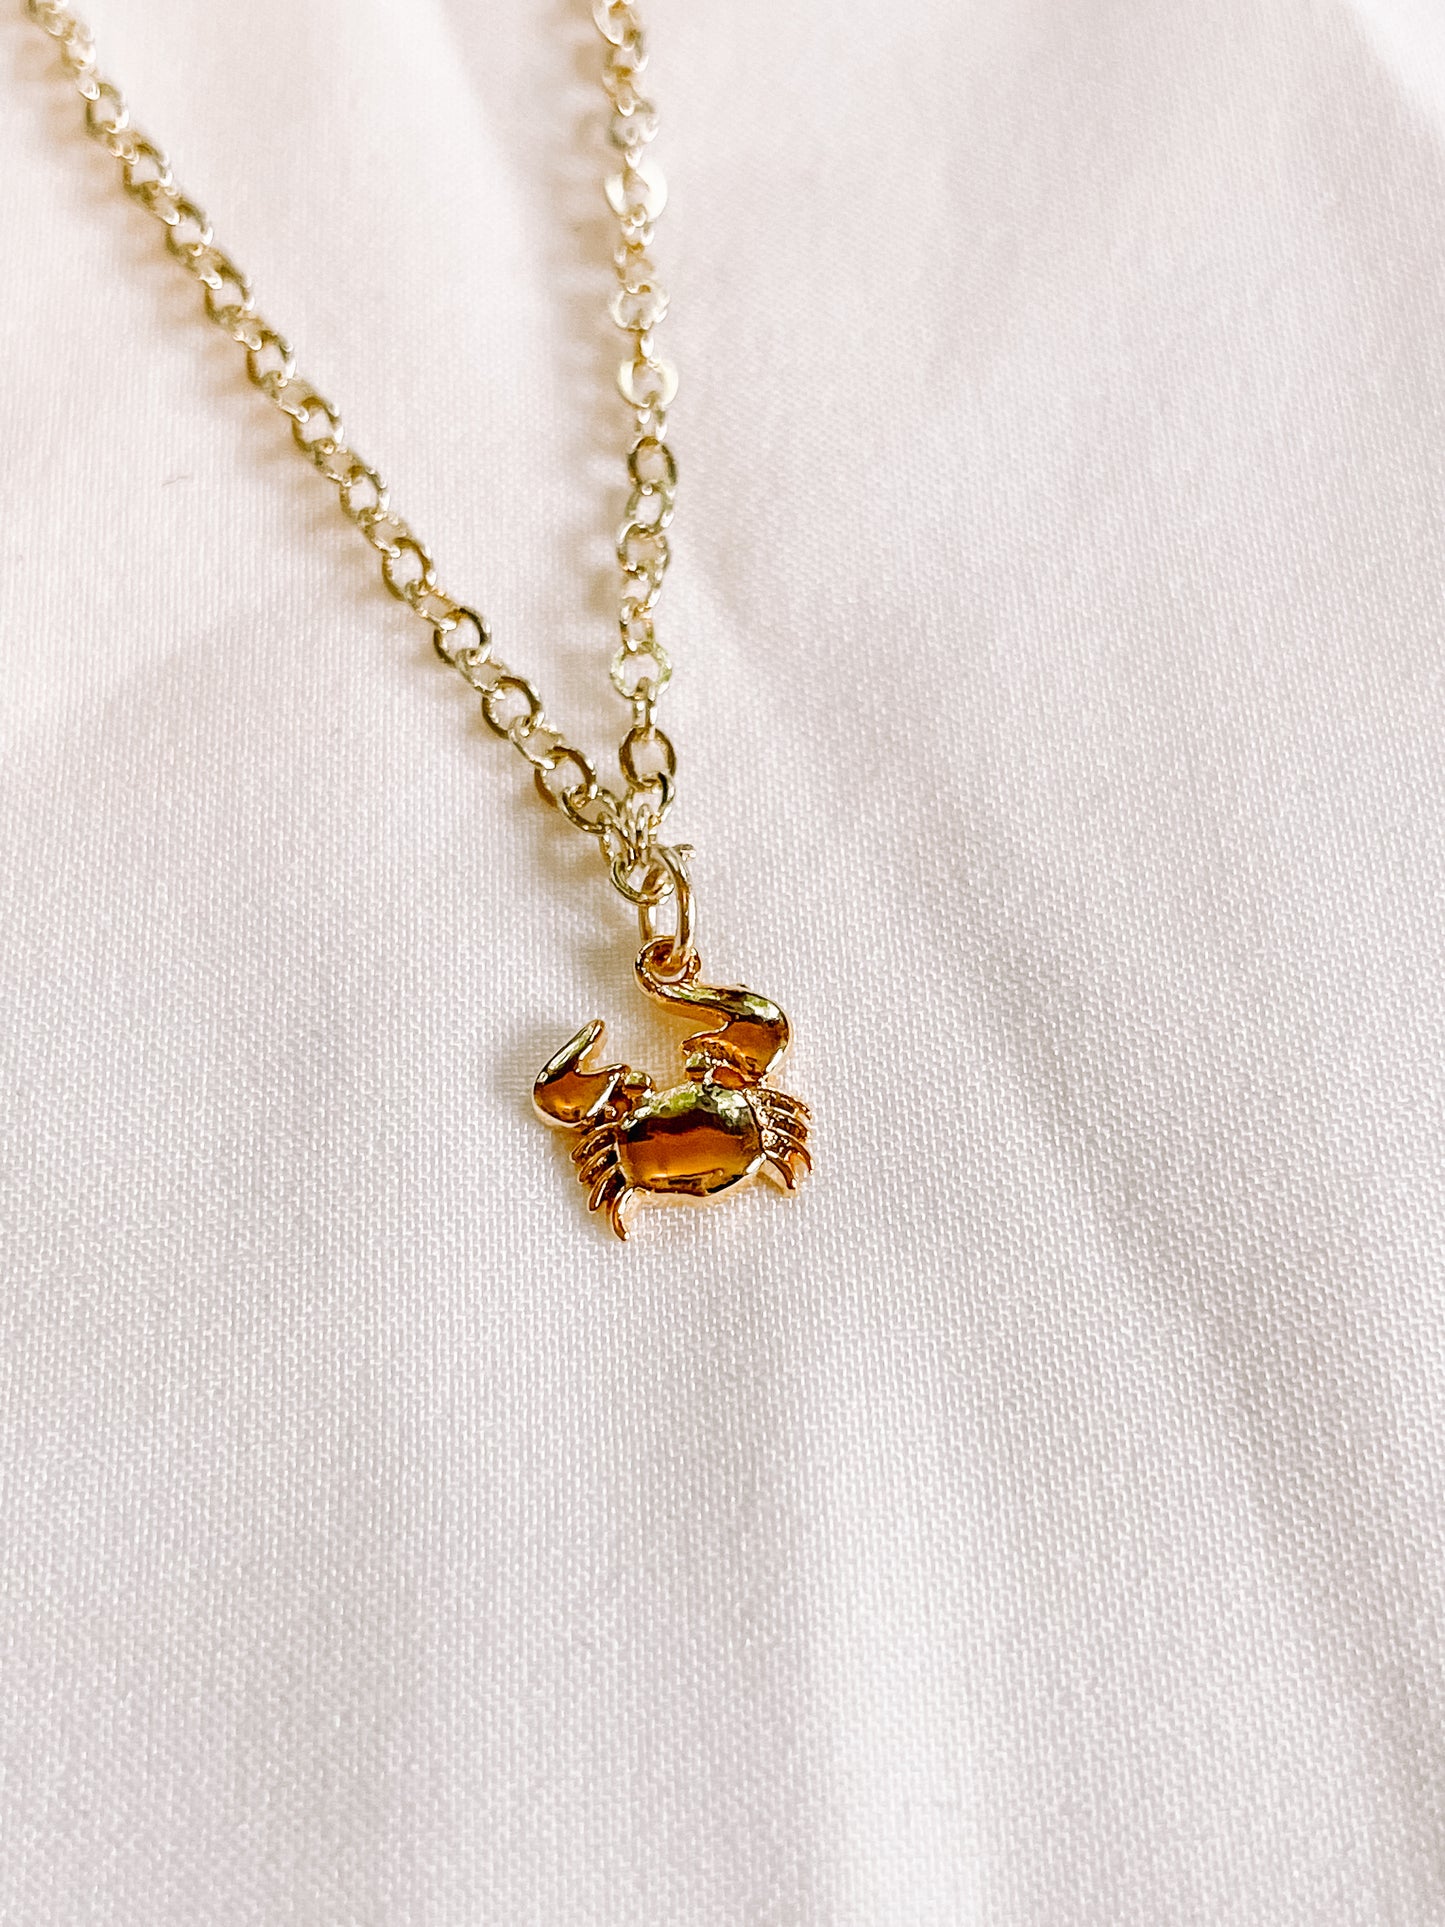 Crabby charm necklace